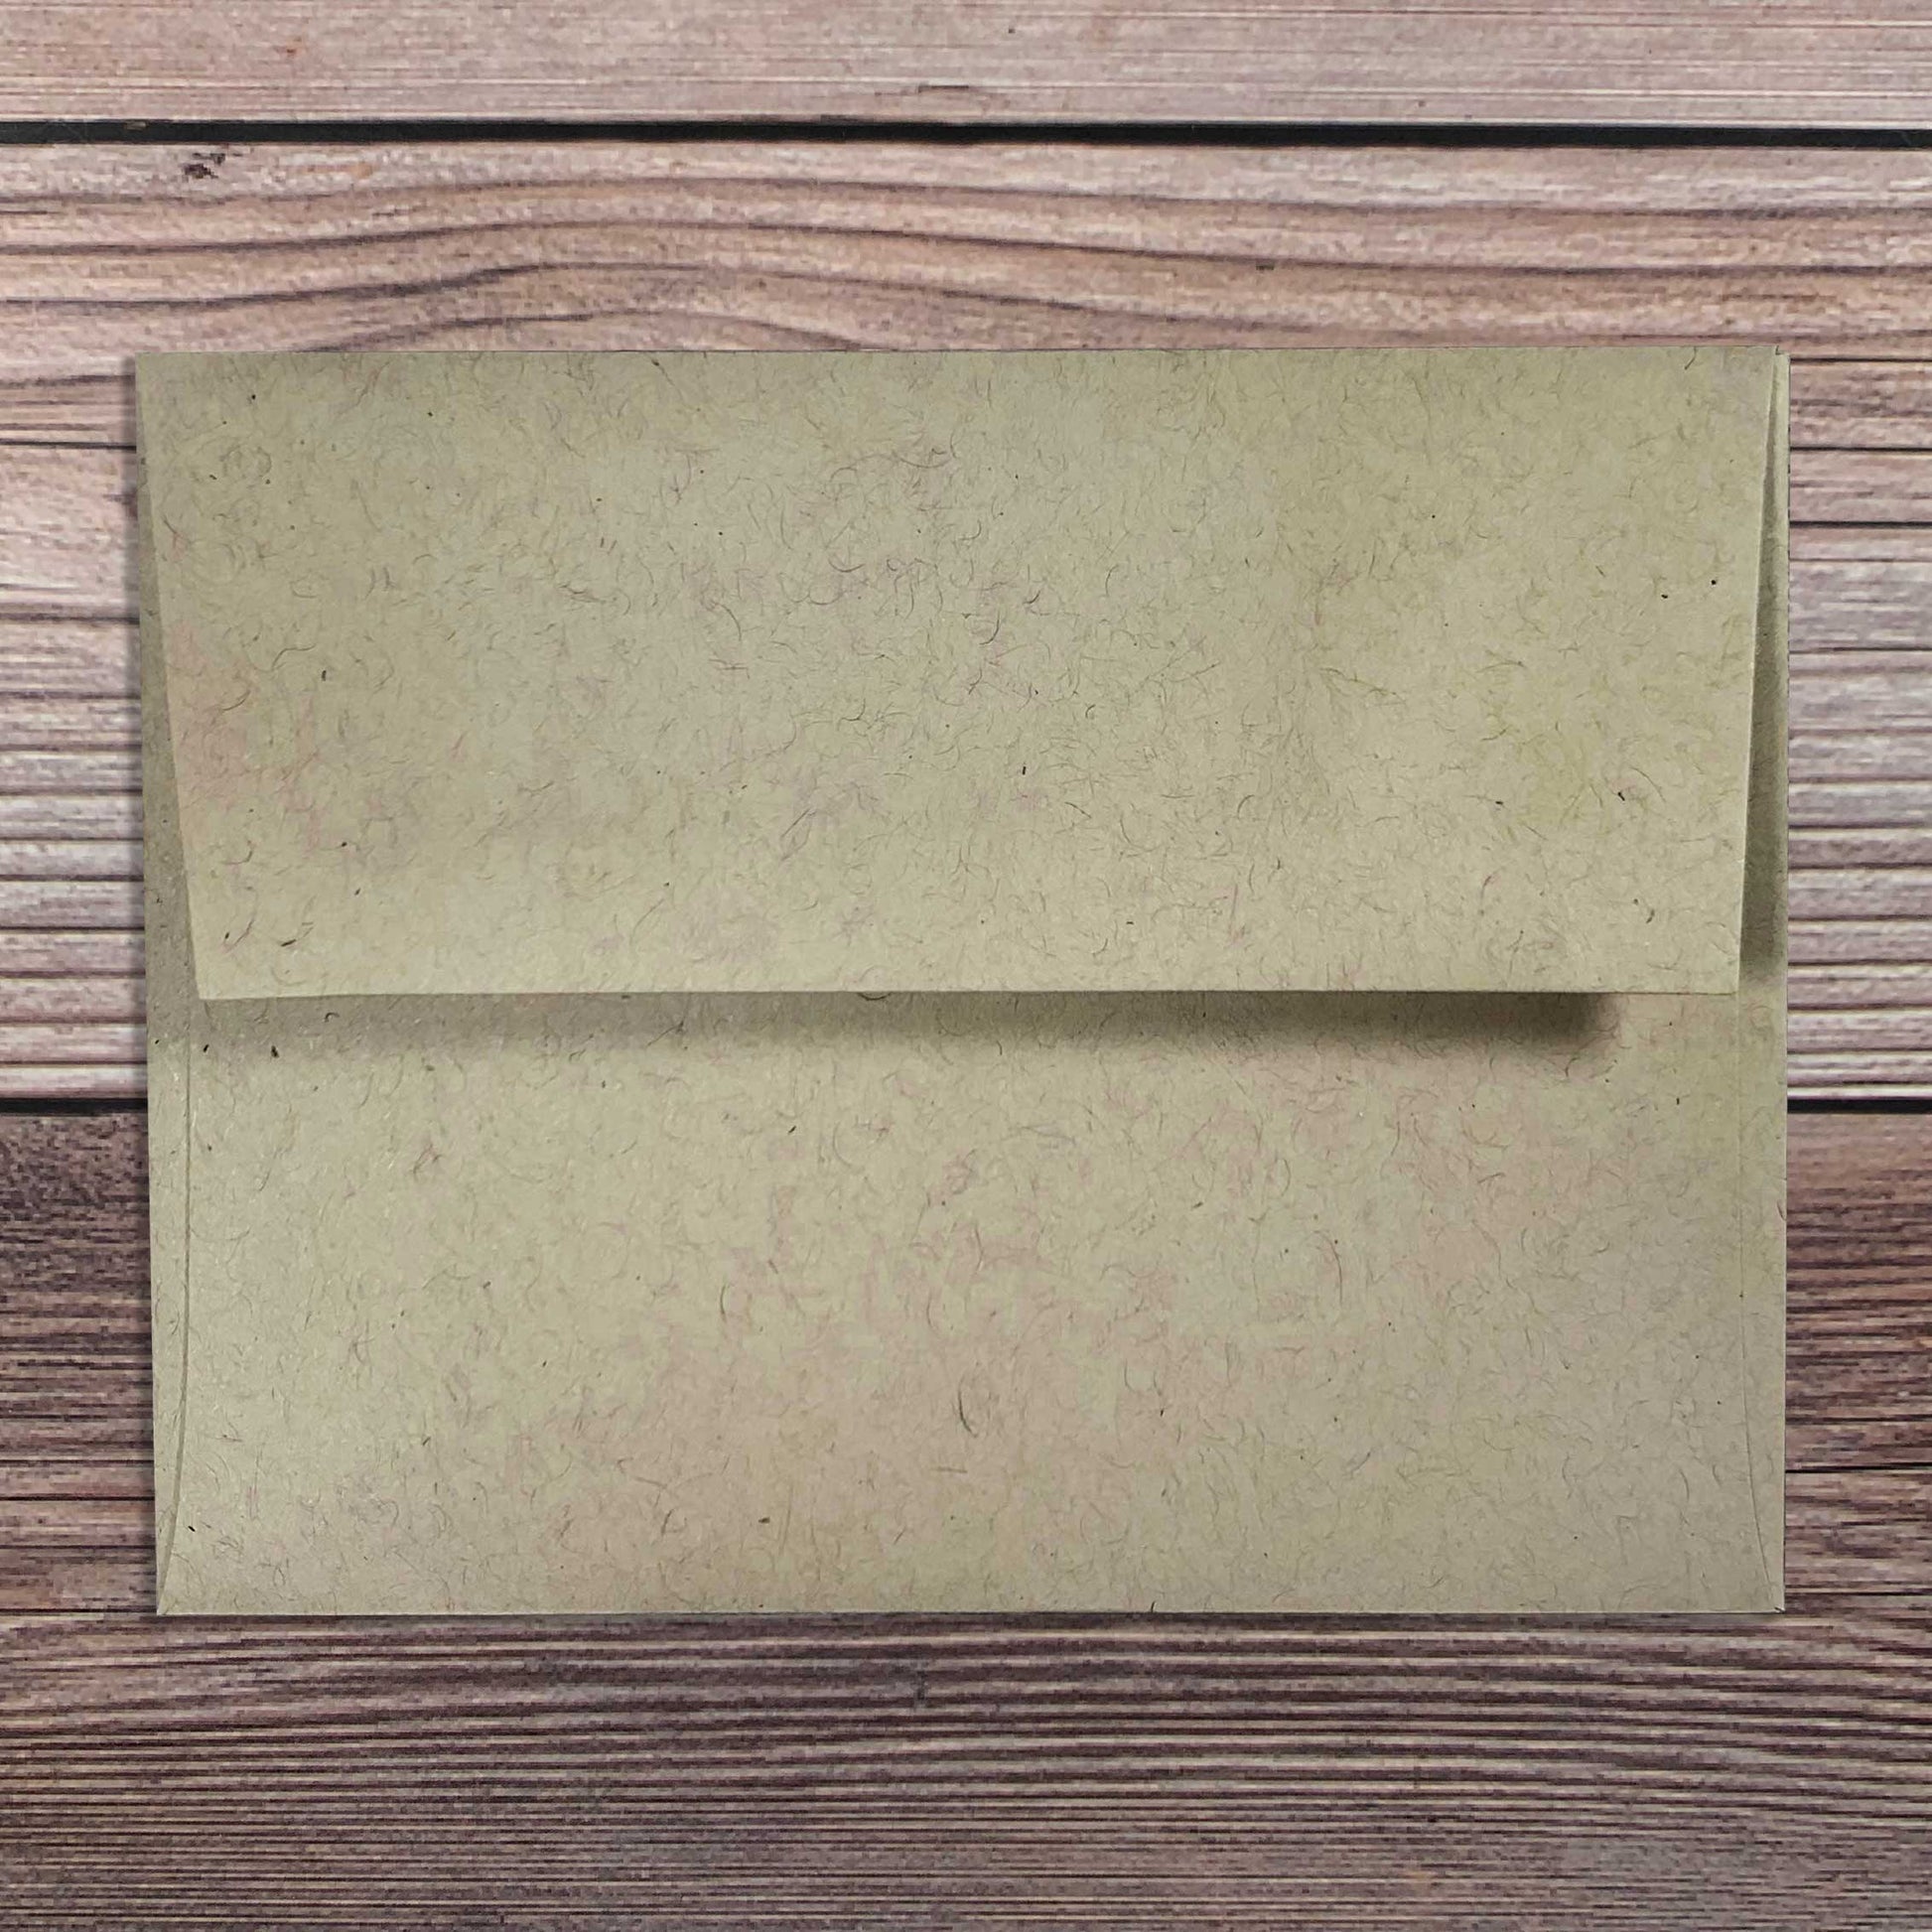 Greeting Card envelope, kraft color, square flap, included with letterpress Mother's Day greeting card.